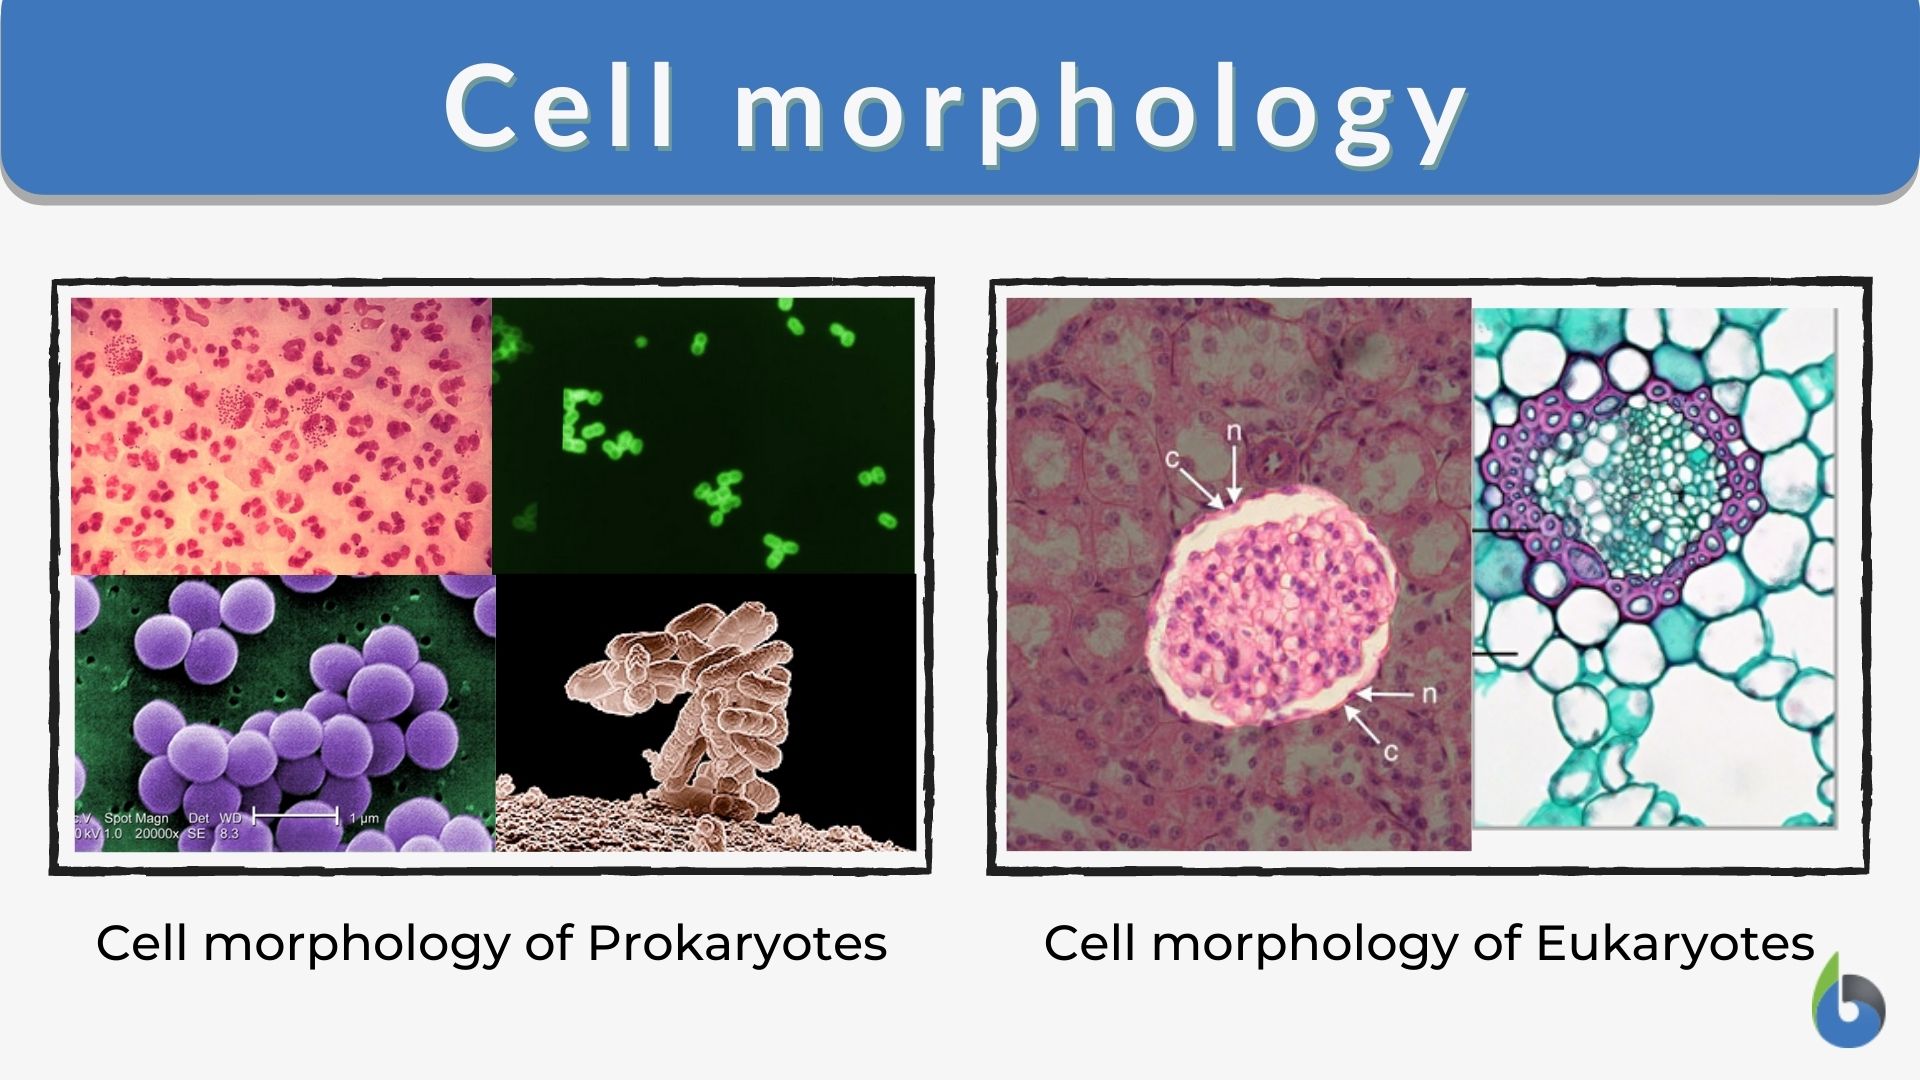 Cell morphology - Definition and Examples - Biology Online Dictionary